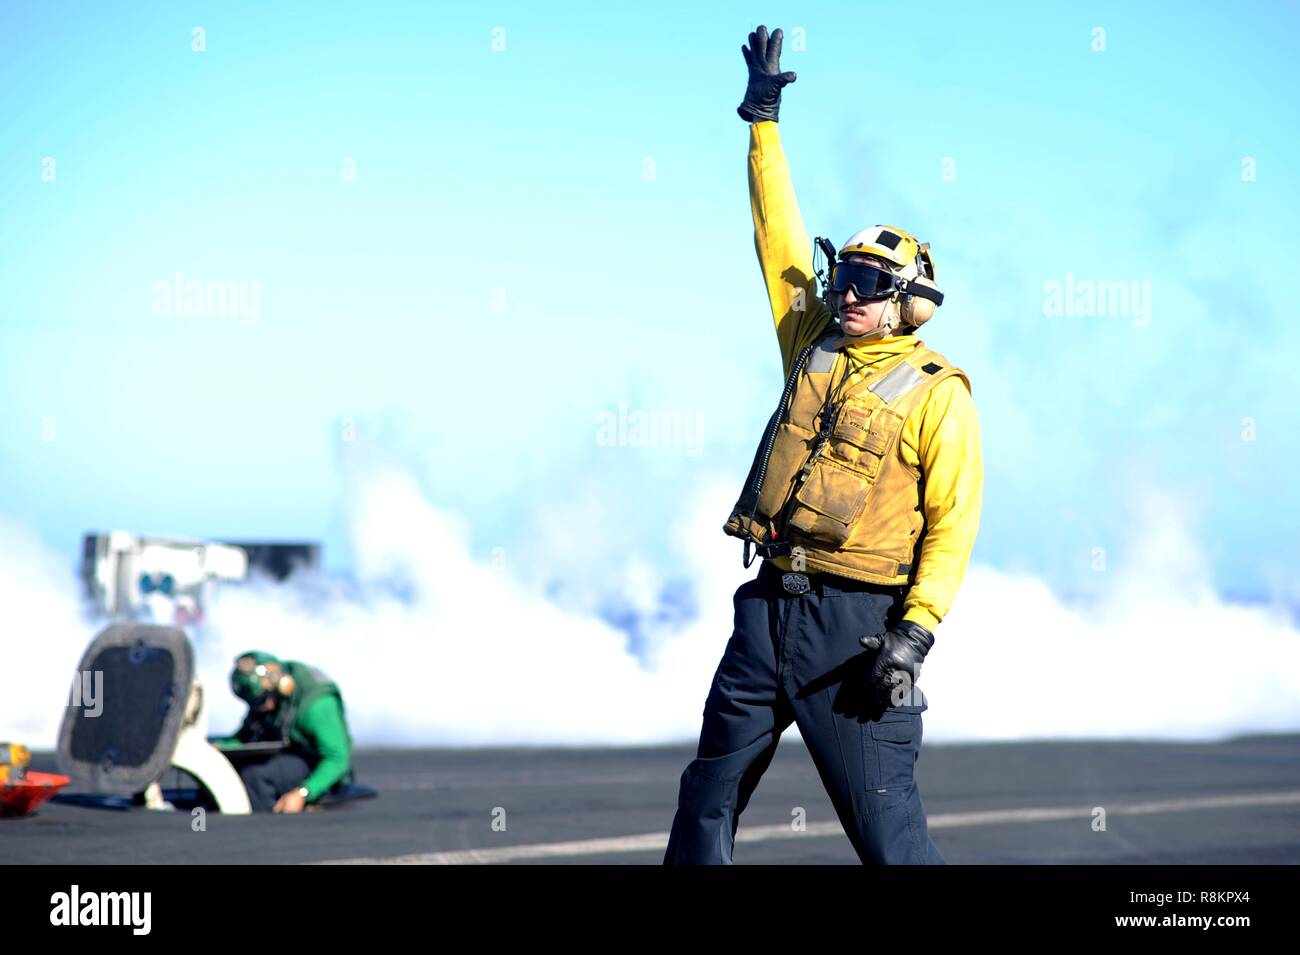 An Aircraft Handler in a yellow shirt, signals the launch of a F/A-18 Super Hornet fighter aboard the Nimitz-class aircraft carrier USS Harry S. Truman December 7, 2018 in the Atlantic Ocean. Yellow shirts are worn by aircraft handlers, aircraft directors, Catapult Officers and Arresting Gear Officers considered the most difficult and important job on the flight deck. Stock Photo